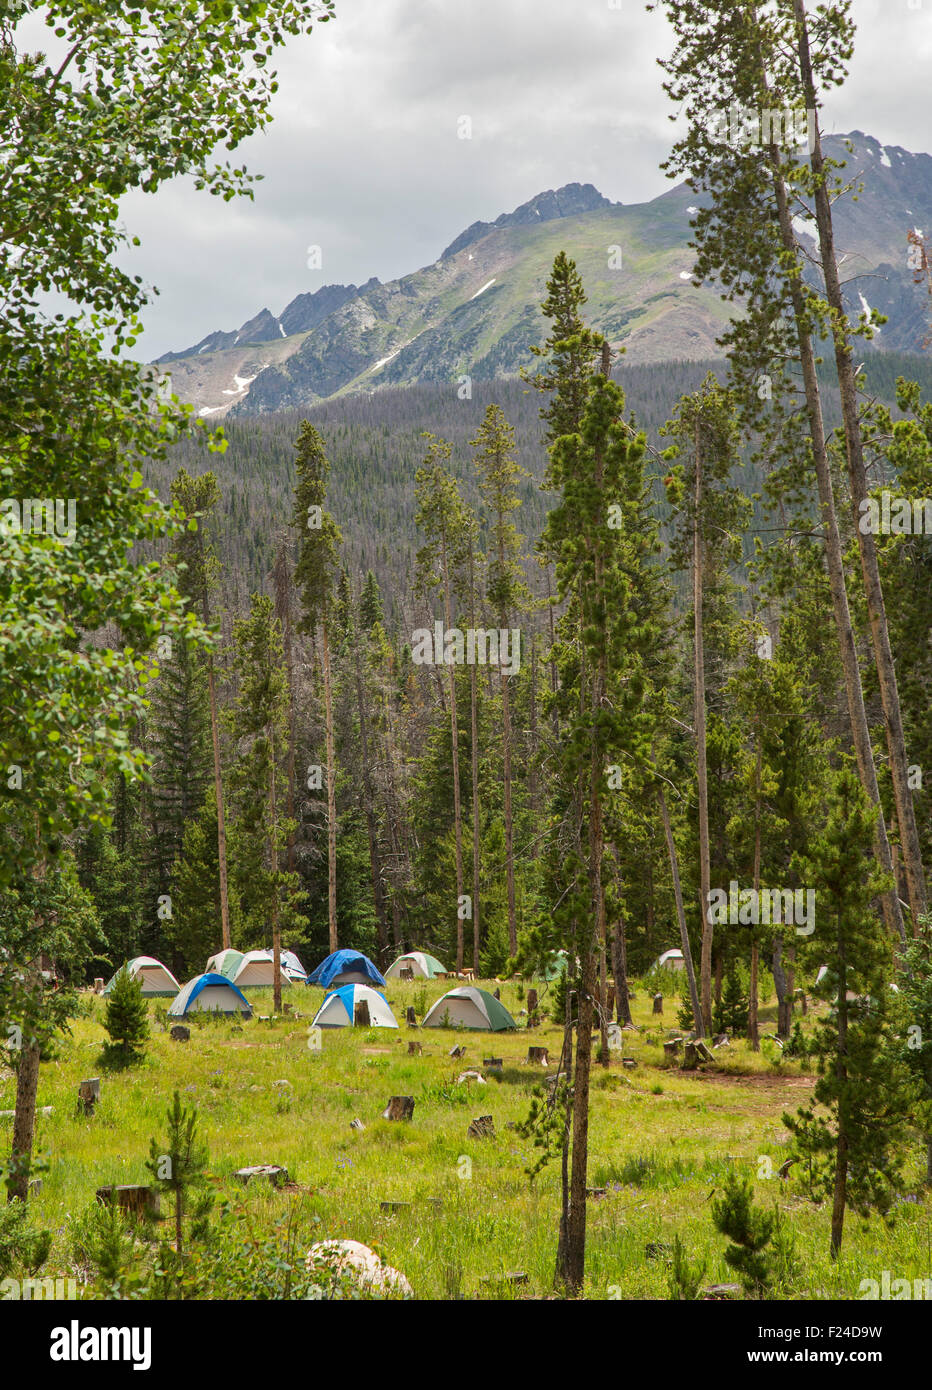 Silverthorne, Colorado - A group campsite at the edge of the Eagles Nest Wilderness Area, part of White River National Forest. Stock Photo